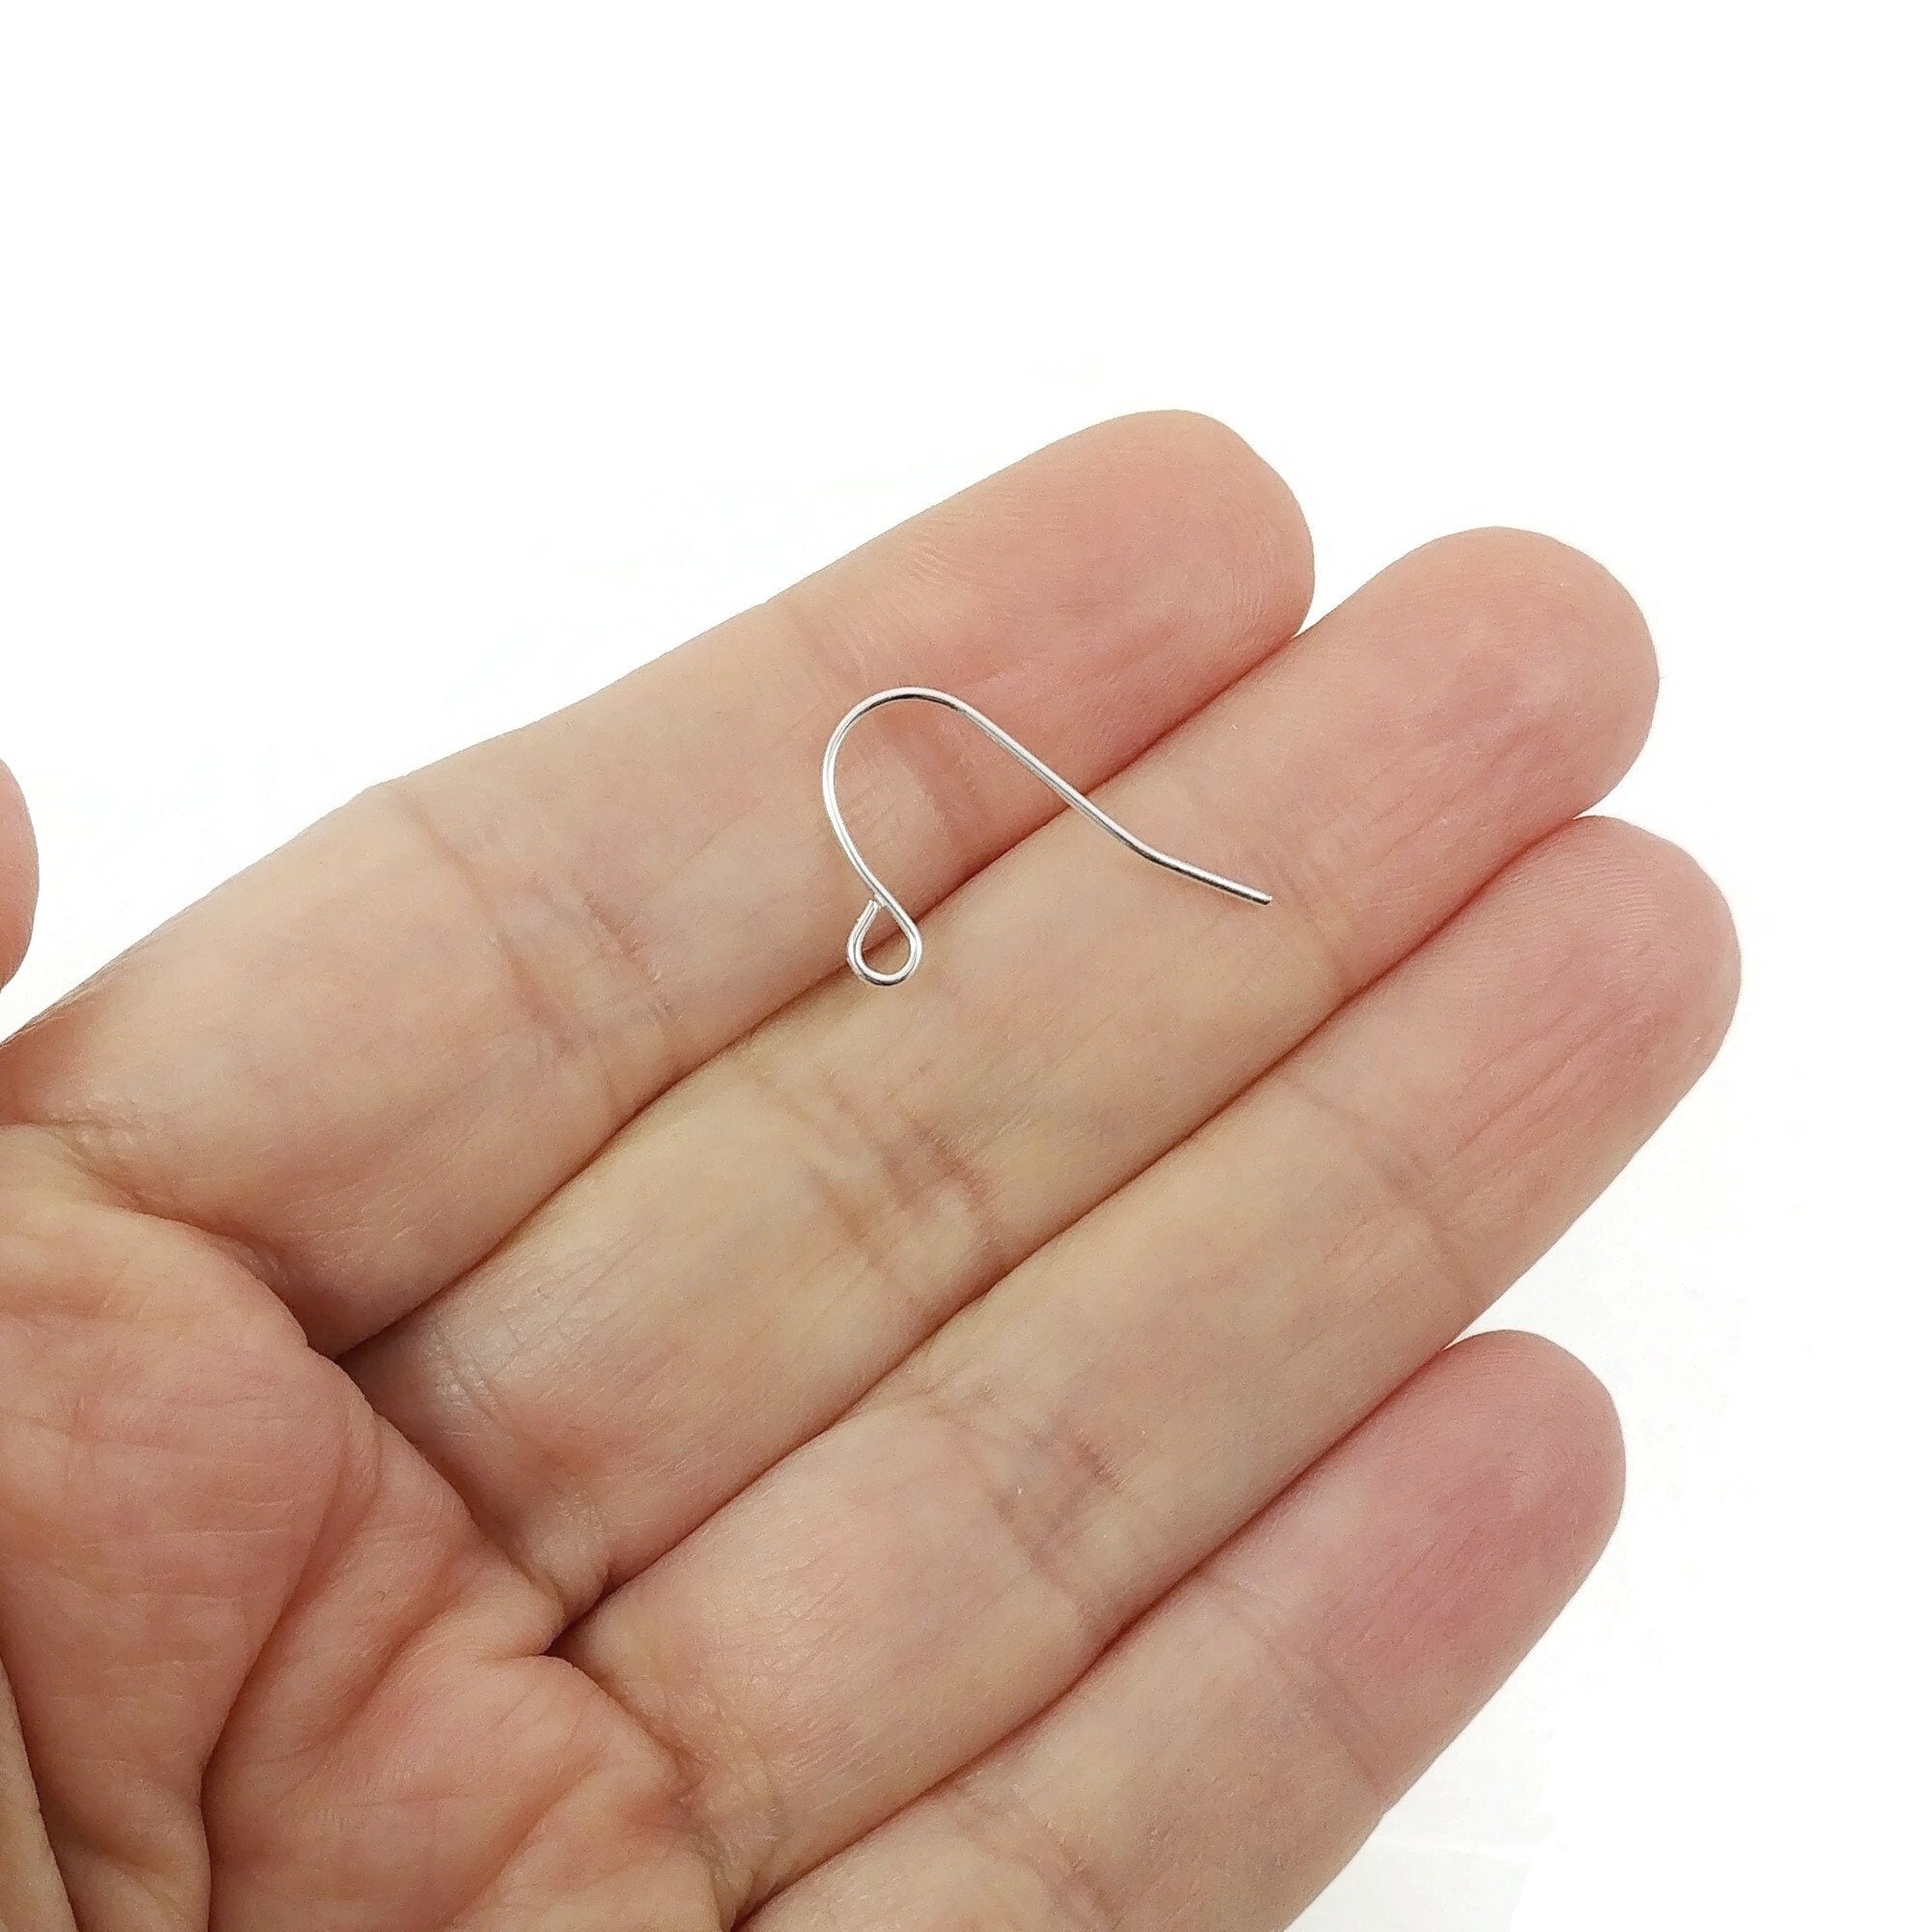 Essential Tips for Choosing Earring Wires